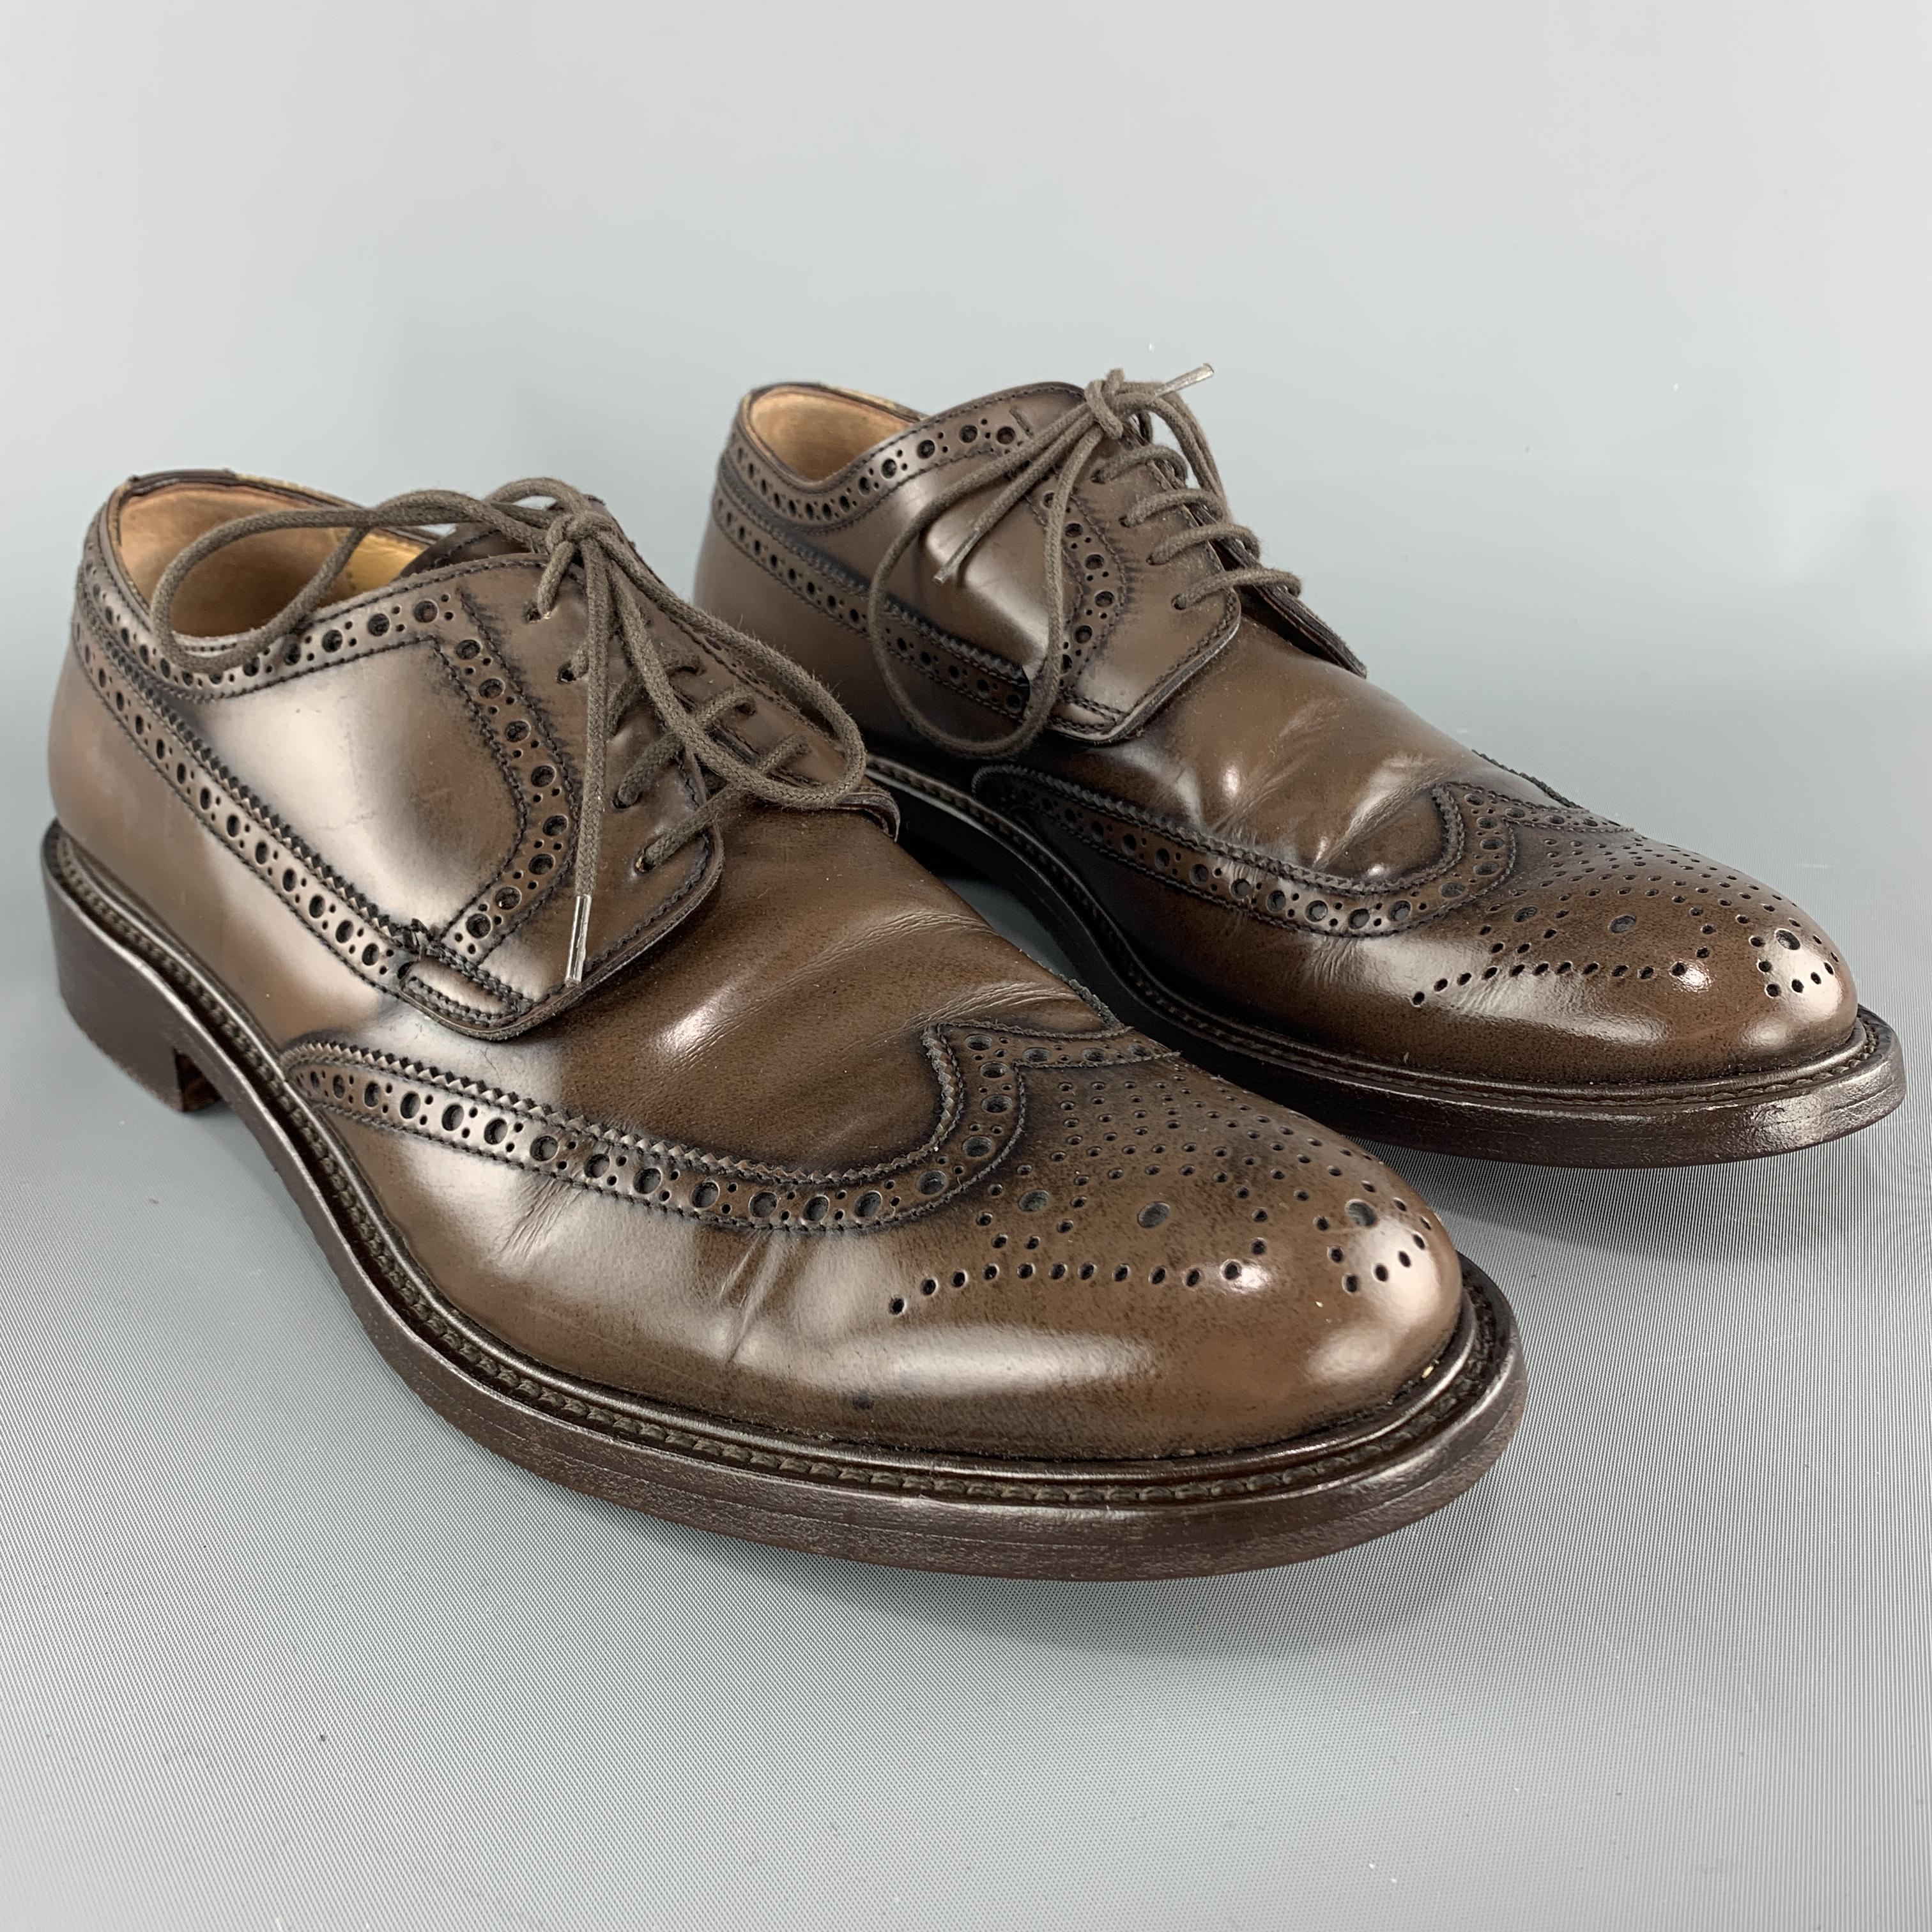 BARNEY'S NEW YORK dress shoes come in taupe brown patent leather with brogueing throughout and a wingtip toe with medallion. Made in Italy.

Good Pre-Owned Condition.
Marked: US 8.5 M

Outsole: 12 x 4.5 in.